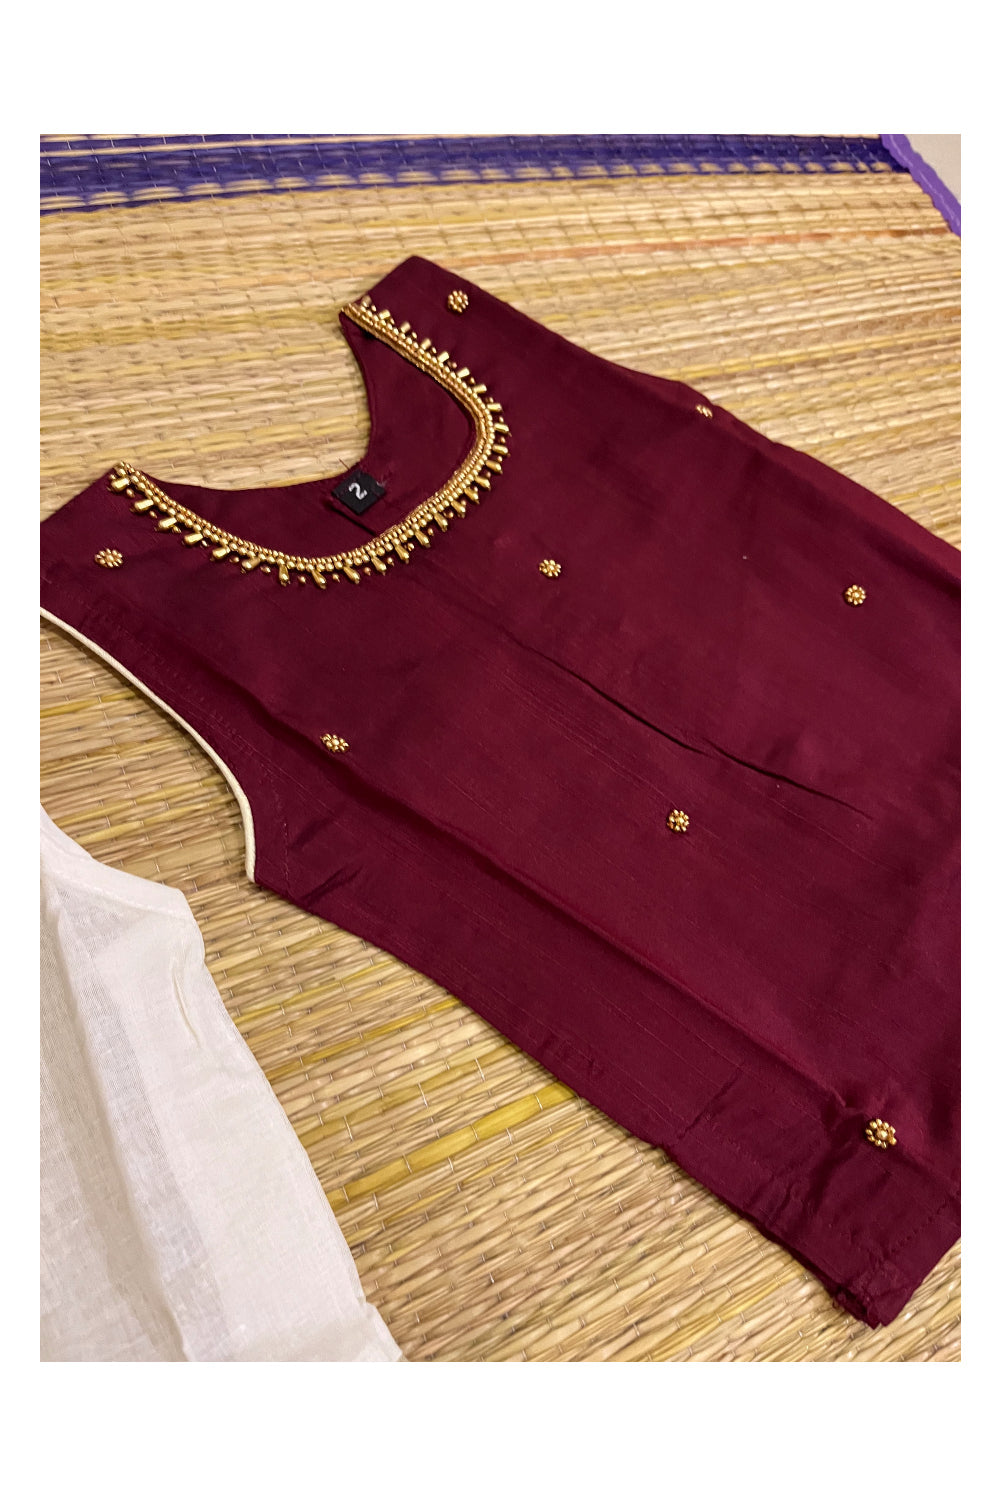 Southloom Kerala Pavada Blouse with Maroon Bead Work Design (Age - 4 Year)